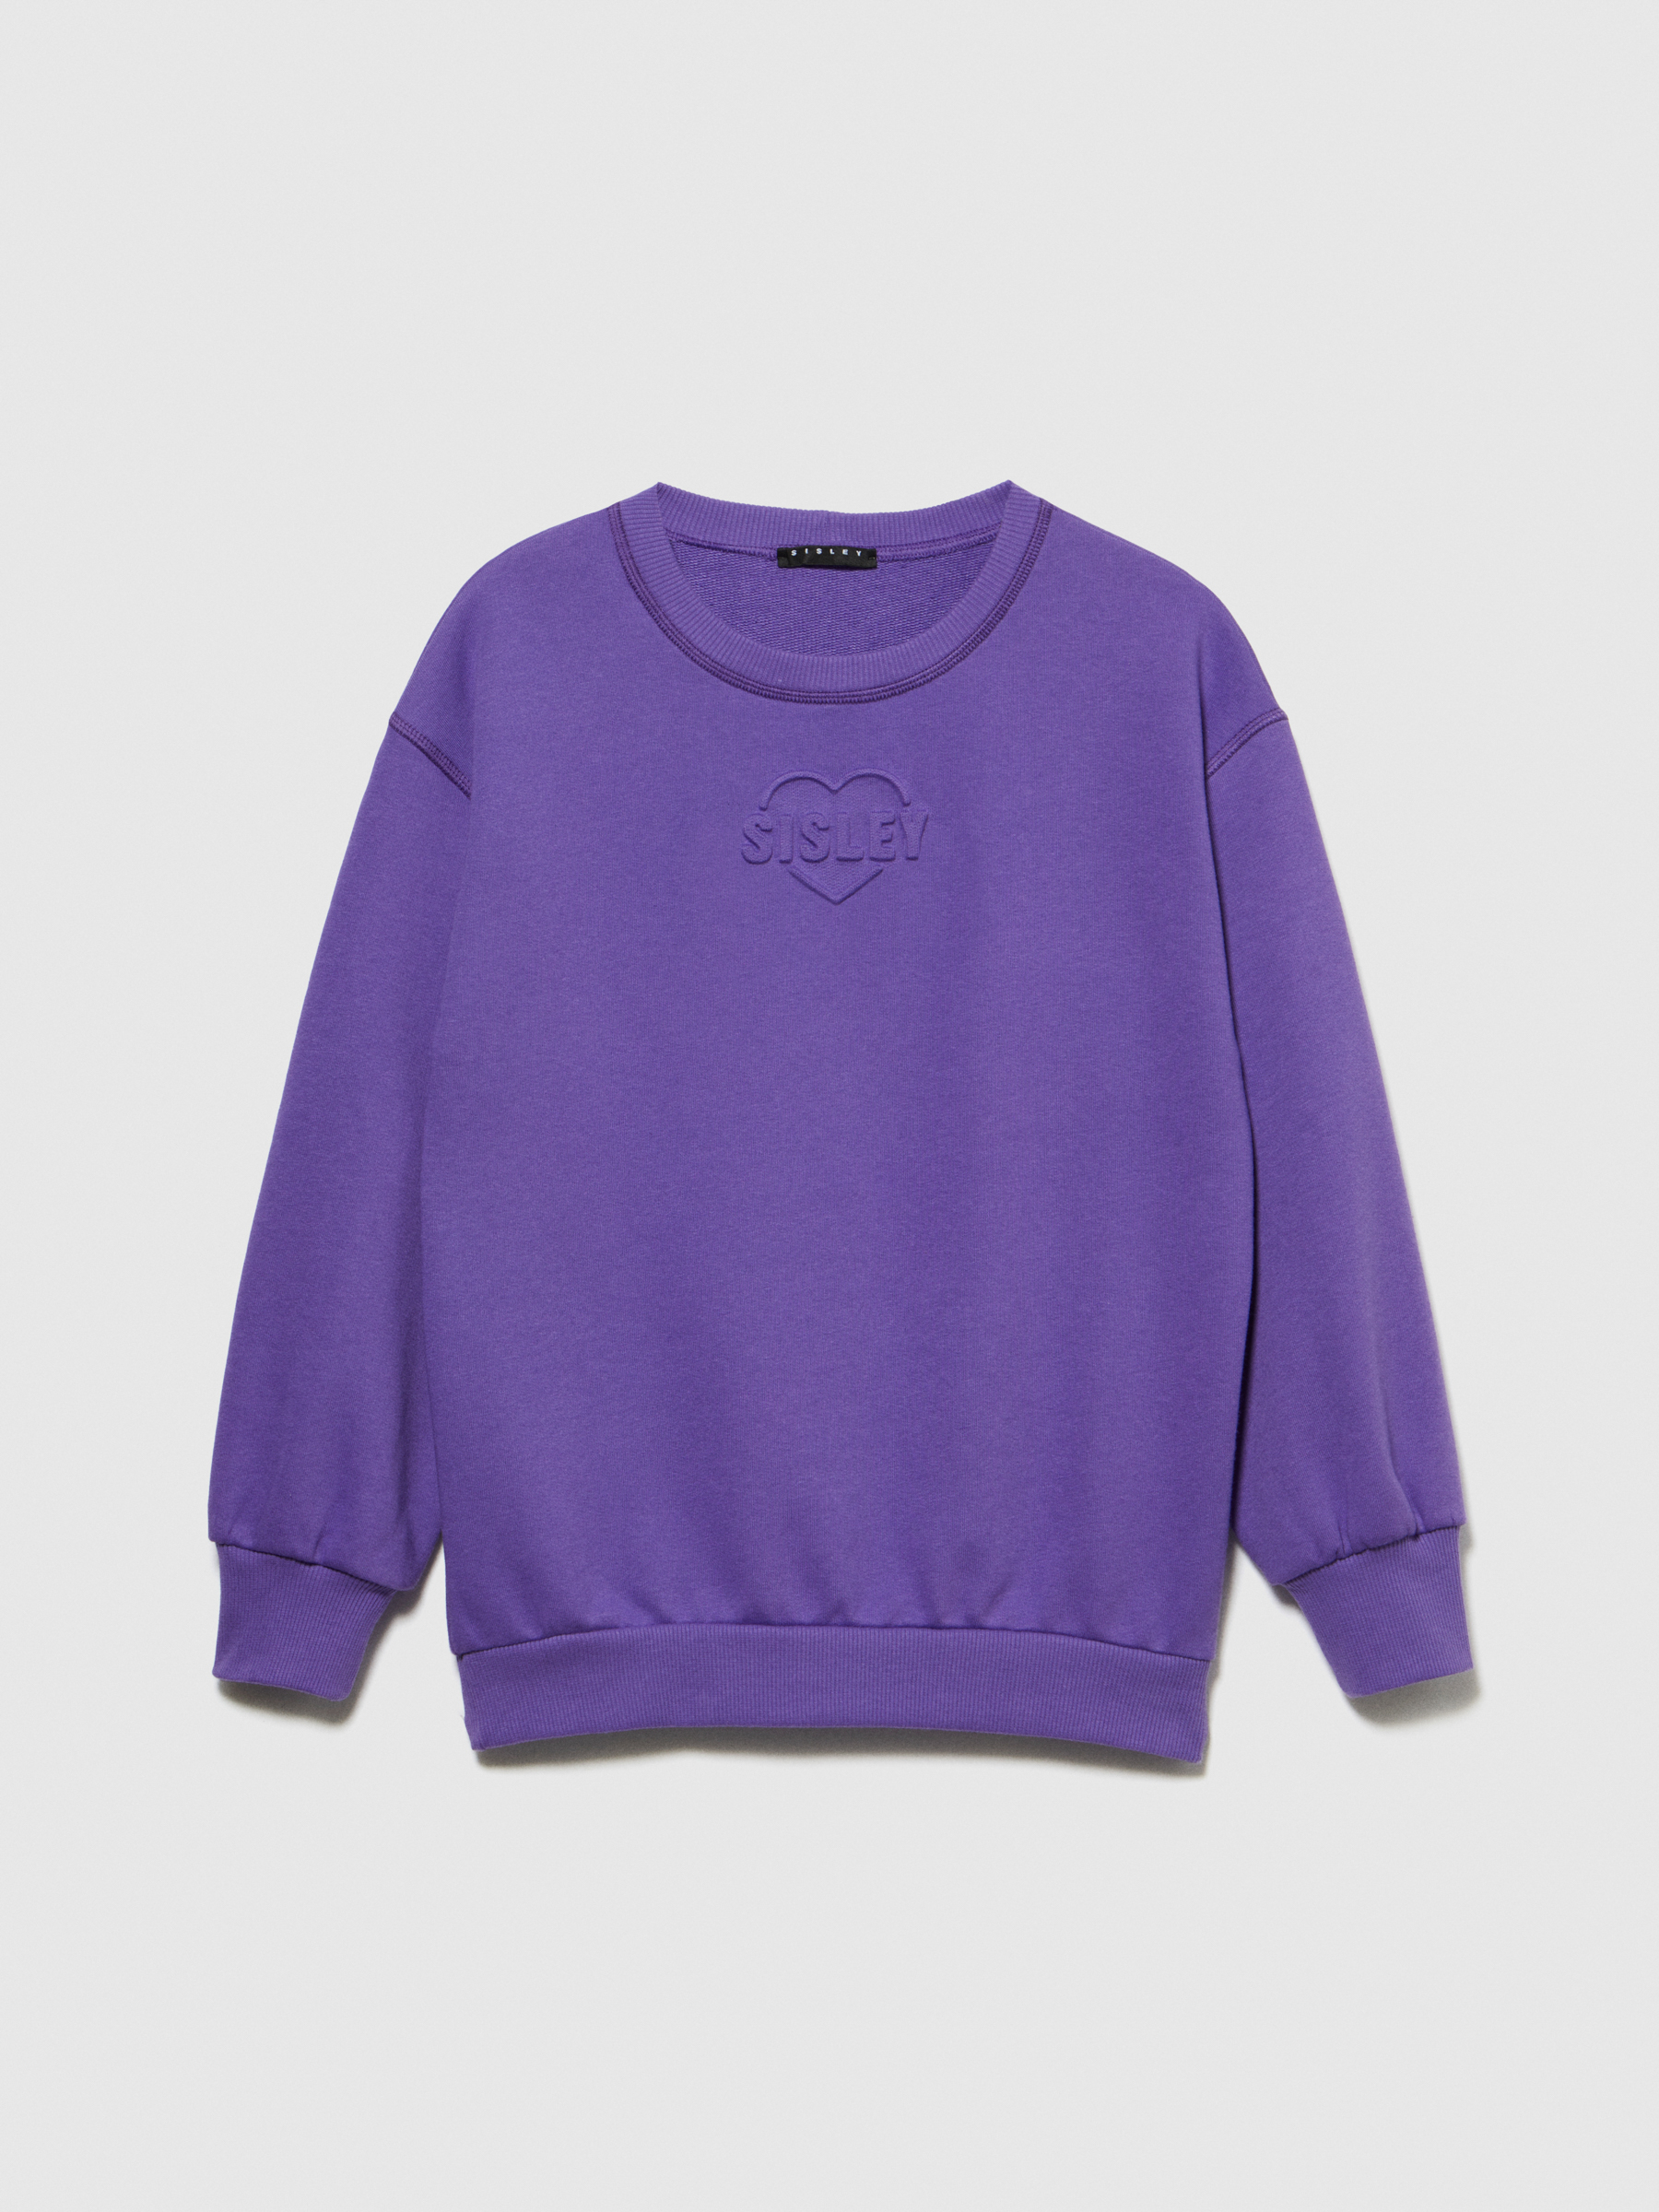 Sisley Young - Sweatshirt With Embossed Print, Woman, Violet, Size: XL